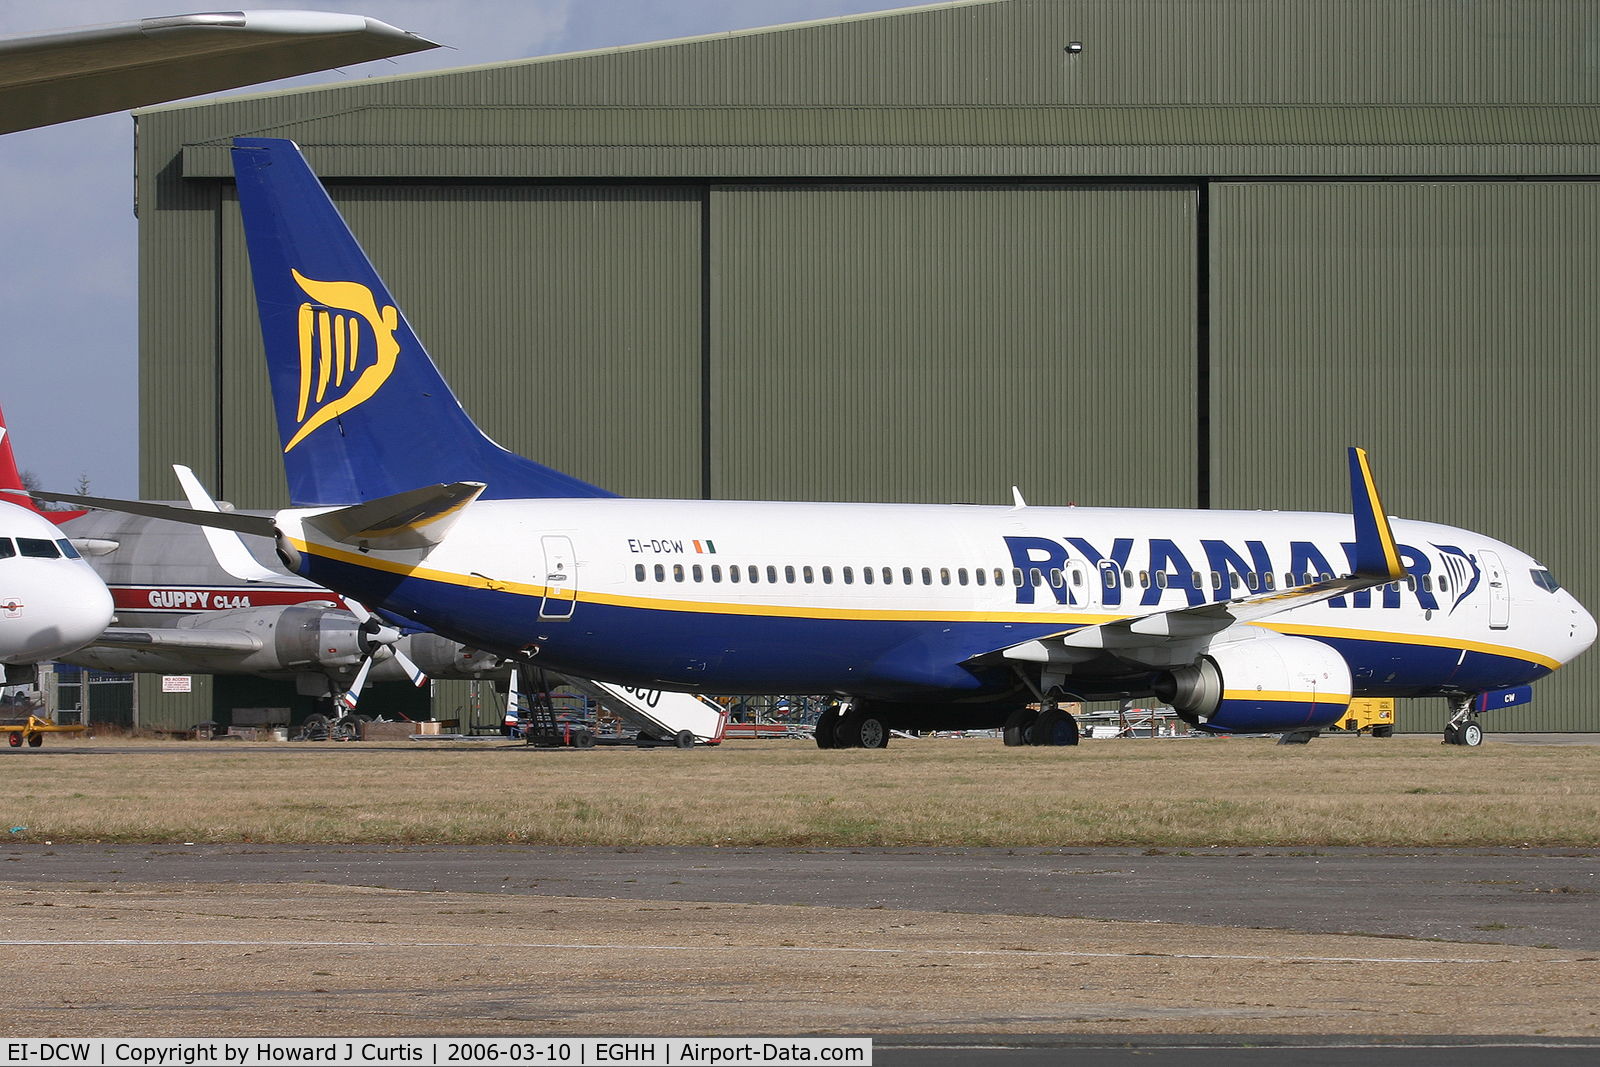 EI-DCW, 2004 Boeing 737-8AS C/N 33568, Ryanair; shortly after fitting of winglets at BASCO.